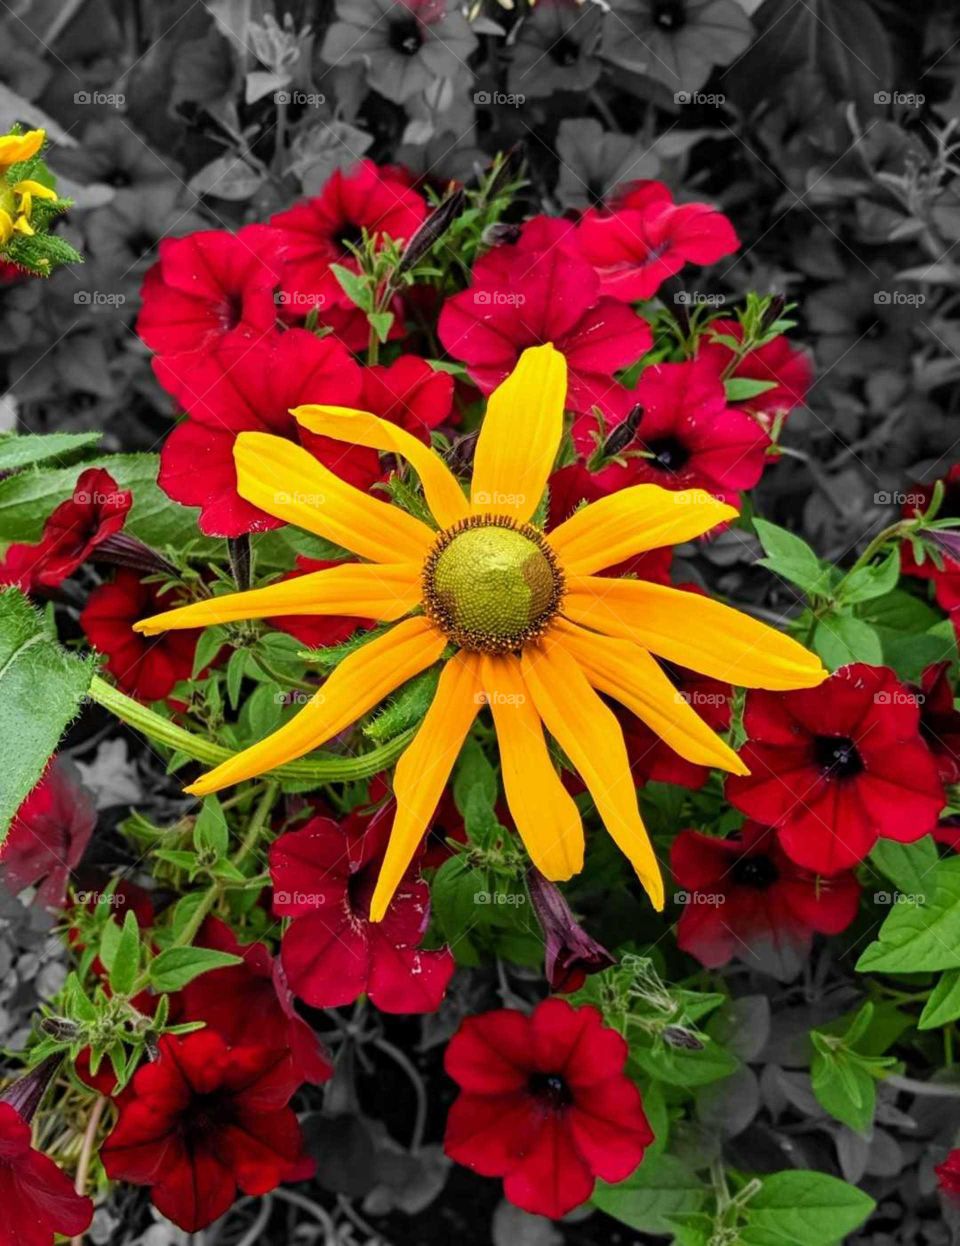 Red Petunis and a yellow Black eyed Susan. Petunia is genus of 20 species of flowering plants of South American origin. The popular flower of the same name derived its epithet from the French